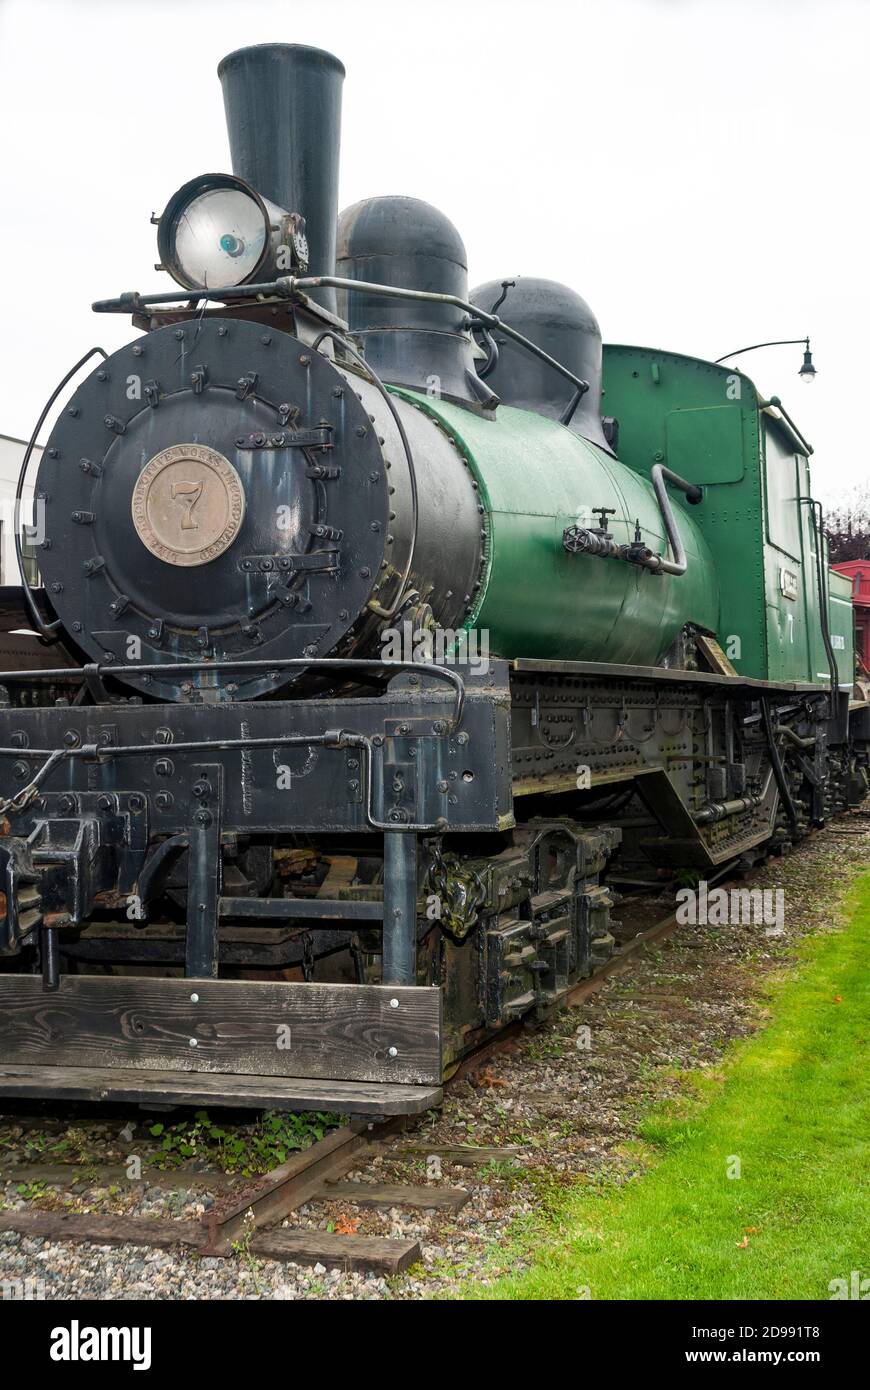 An old steam locomotive and caboose on a section of track in Shelton ...